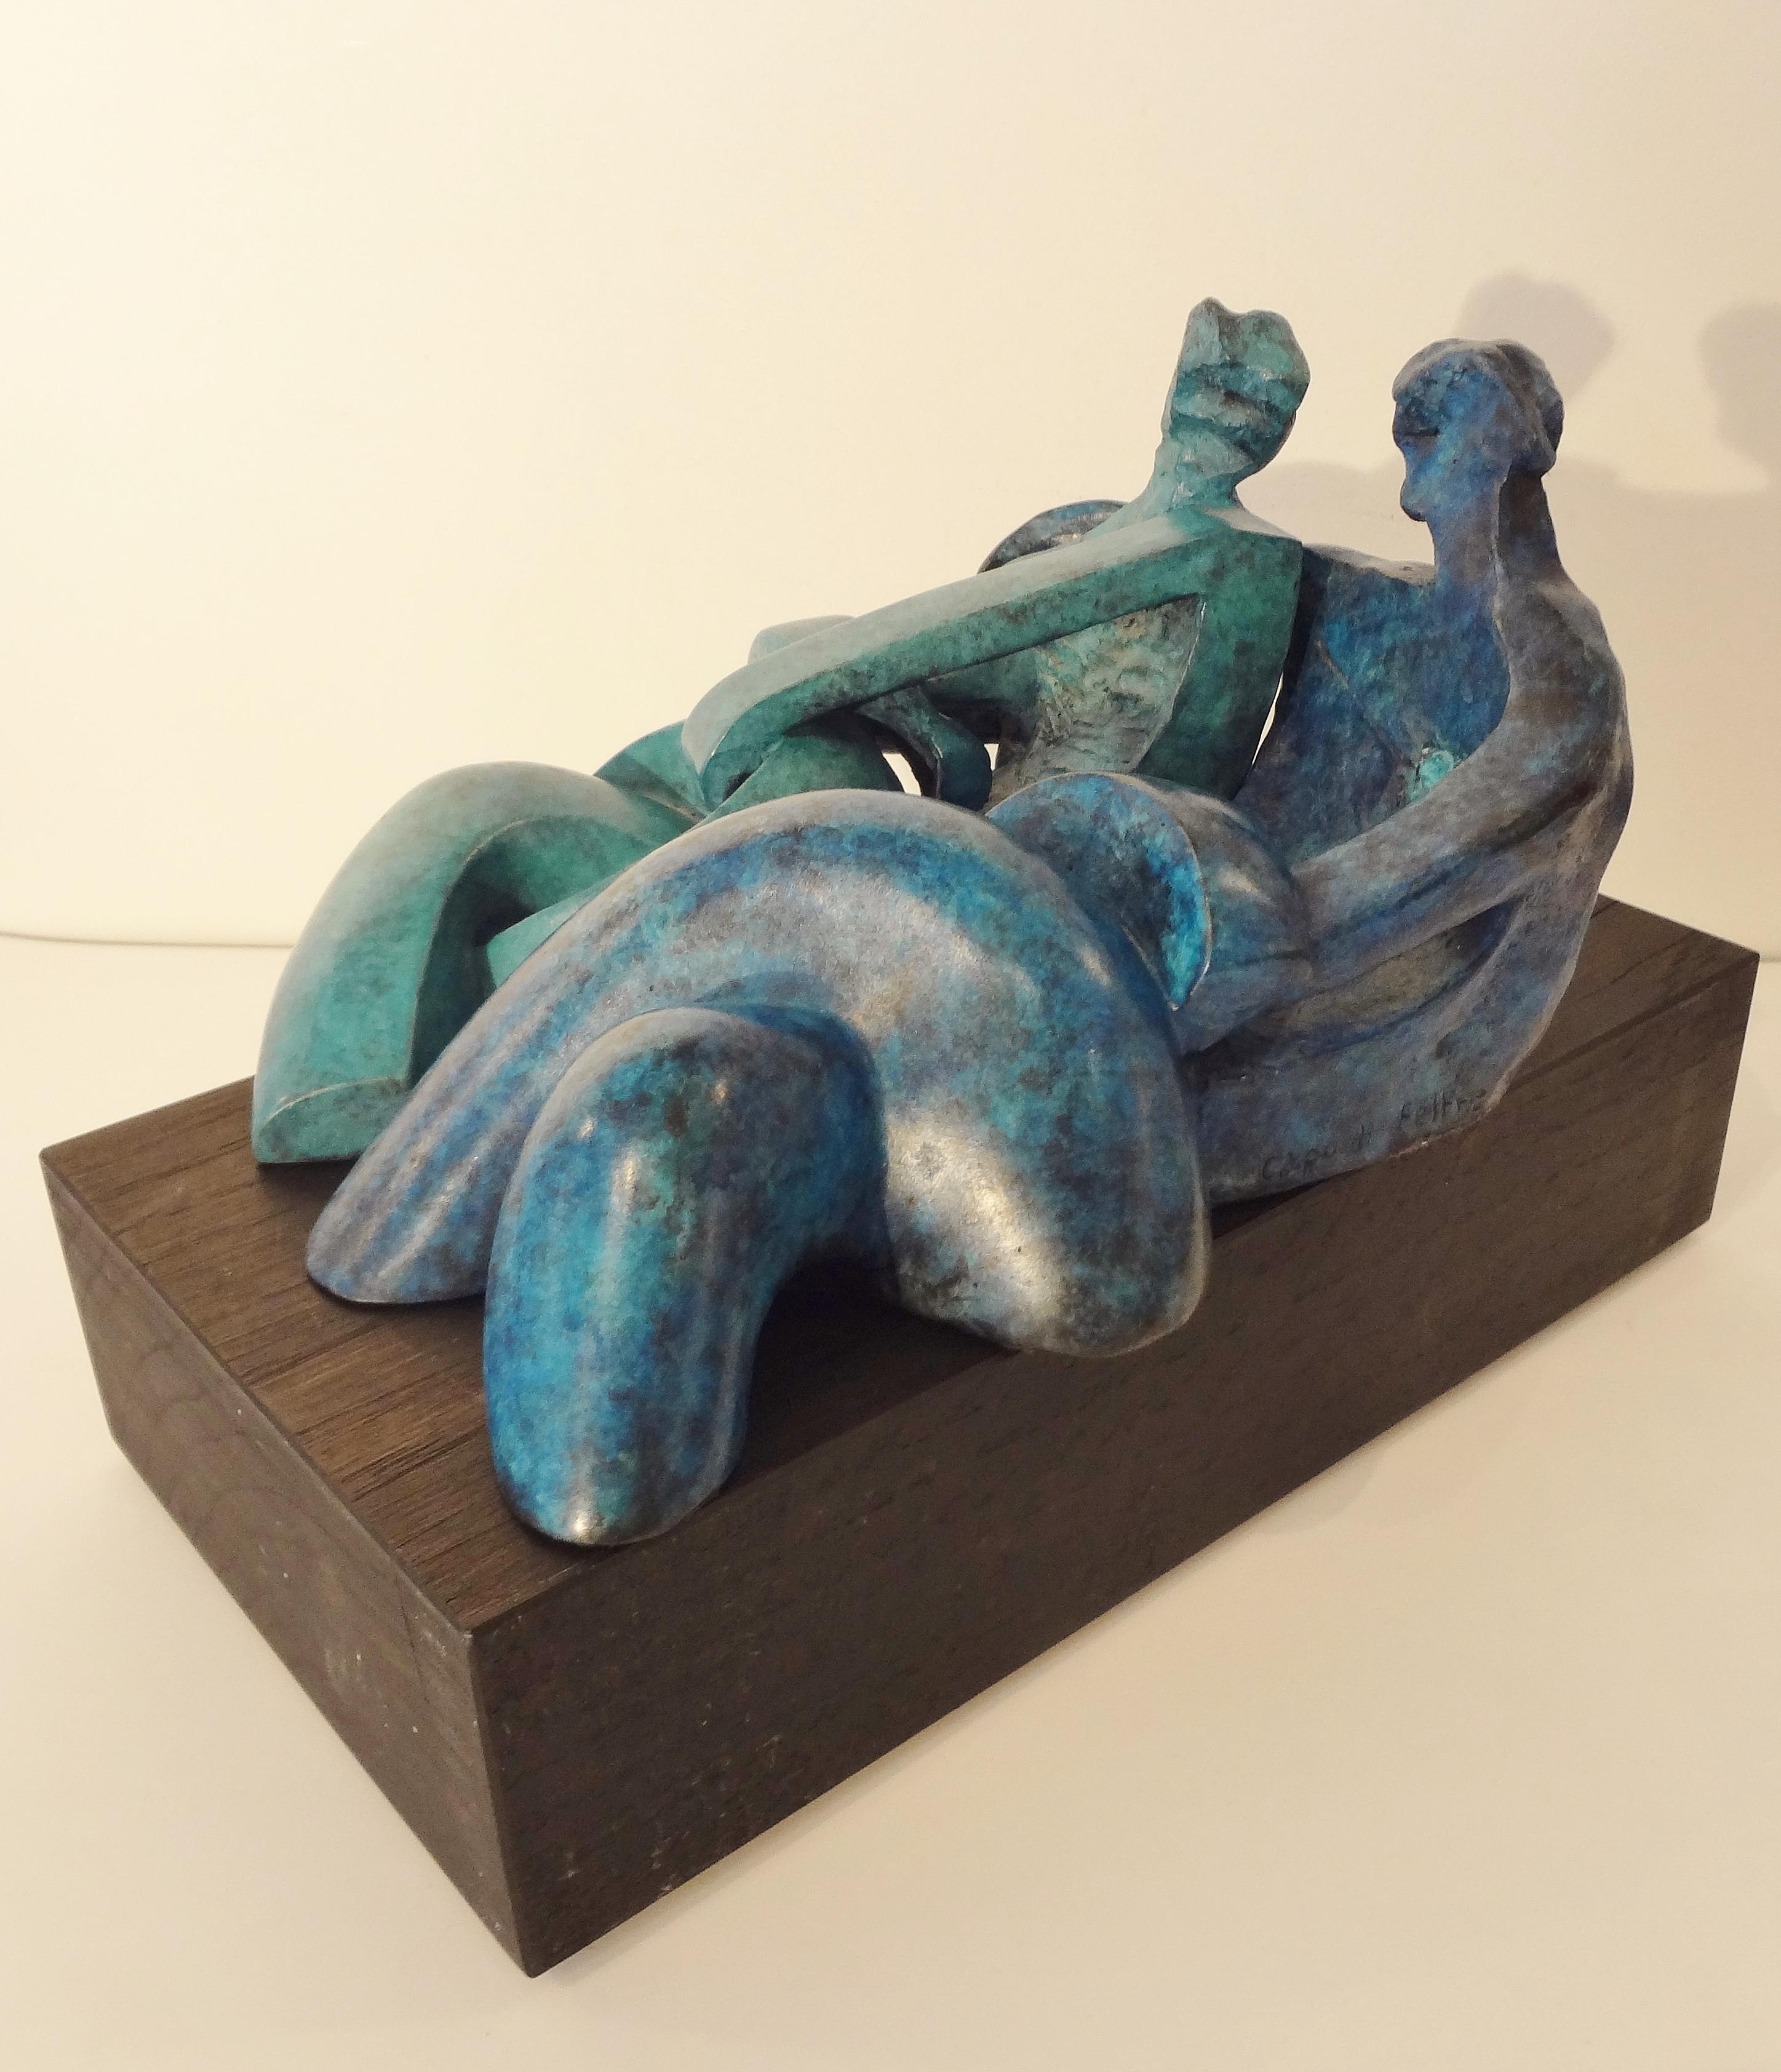 The lovers, Little couple, 2000s, by Capo du Feltre (1952 - )
Blue and turquese patinated bronze. Signed, numbered 3/8. Guastini Stamp.
on a wood base. 
Provenance : The artist's atelier.

Anne-Laure CAPO di FELTRE (1952 - )
first teaching at the